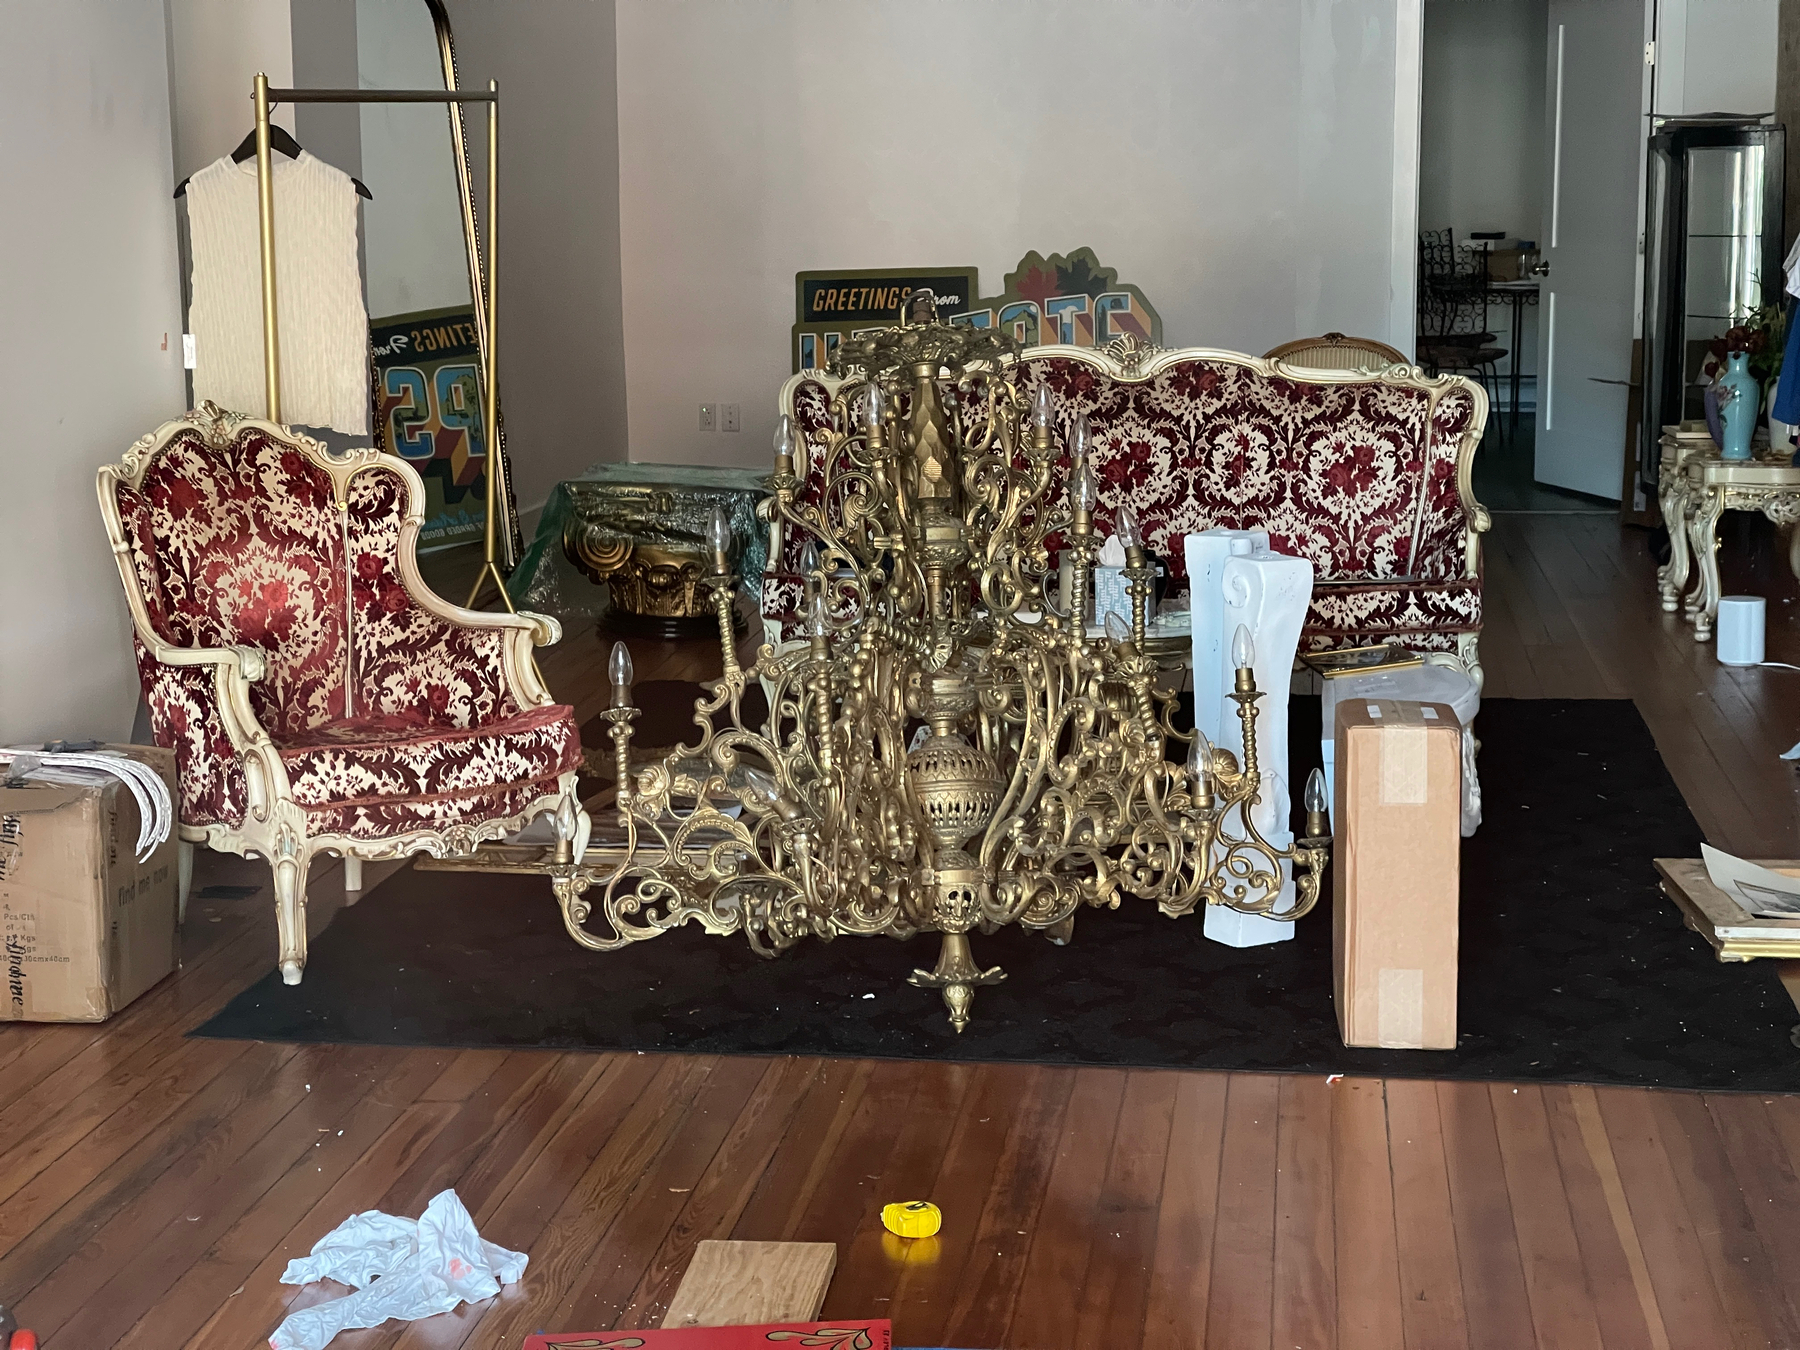 Baroque chair, sofa and chandelier in a shop getting ready to open.